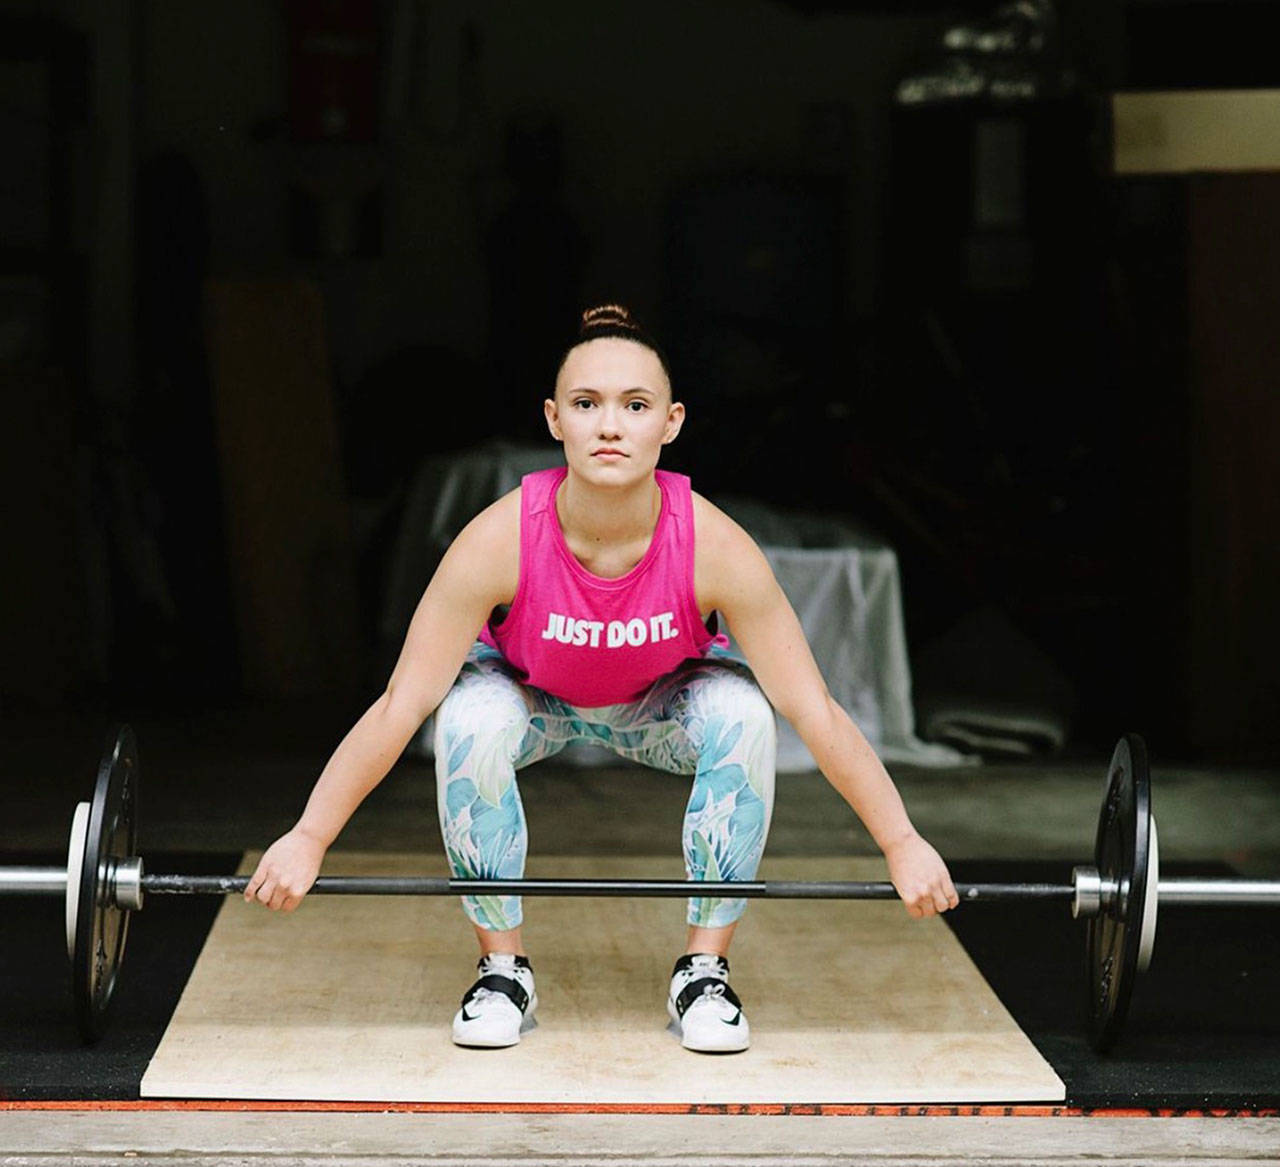 Meghan Strey said in the snatch event, she’s lifted 106 kilos, or 233.69 pounds. In the clean and jerk, she’s raised 103 kilos, or 227.07 pounds. Courtesy photo